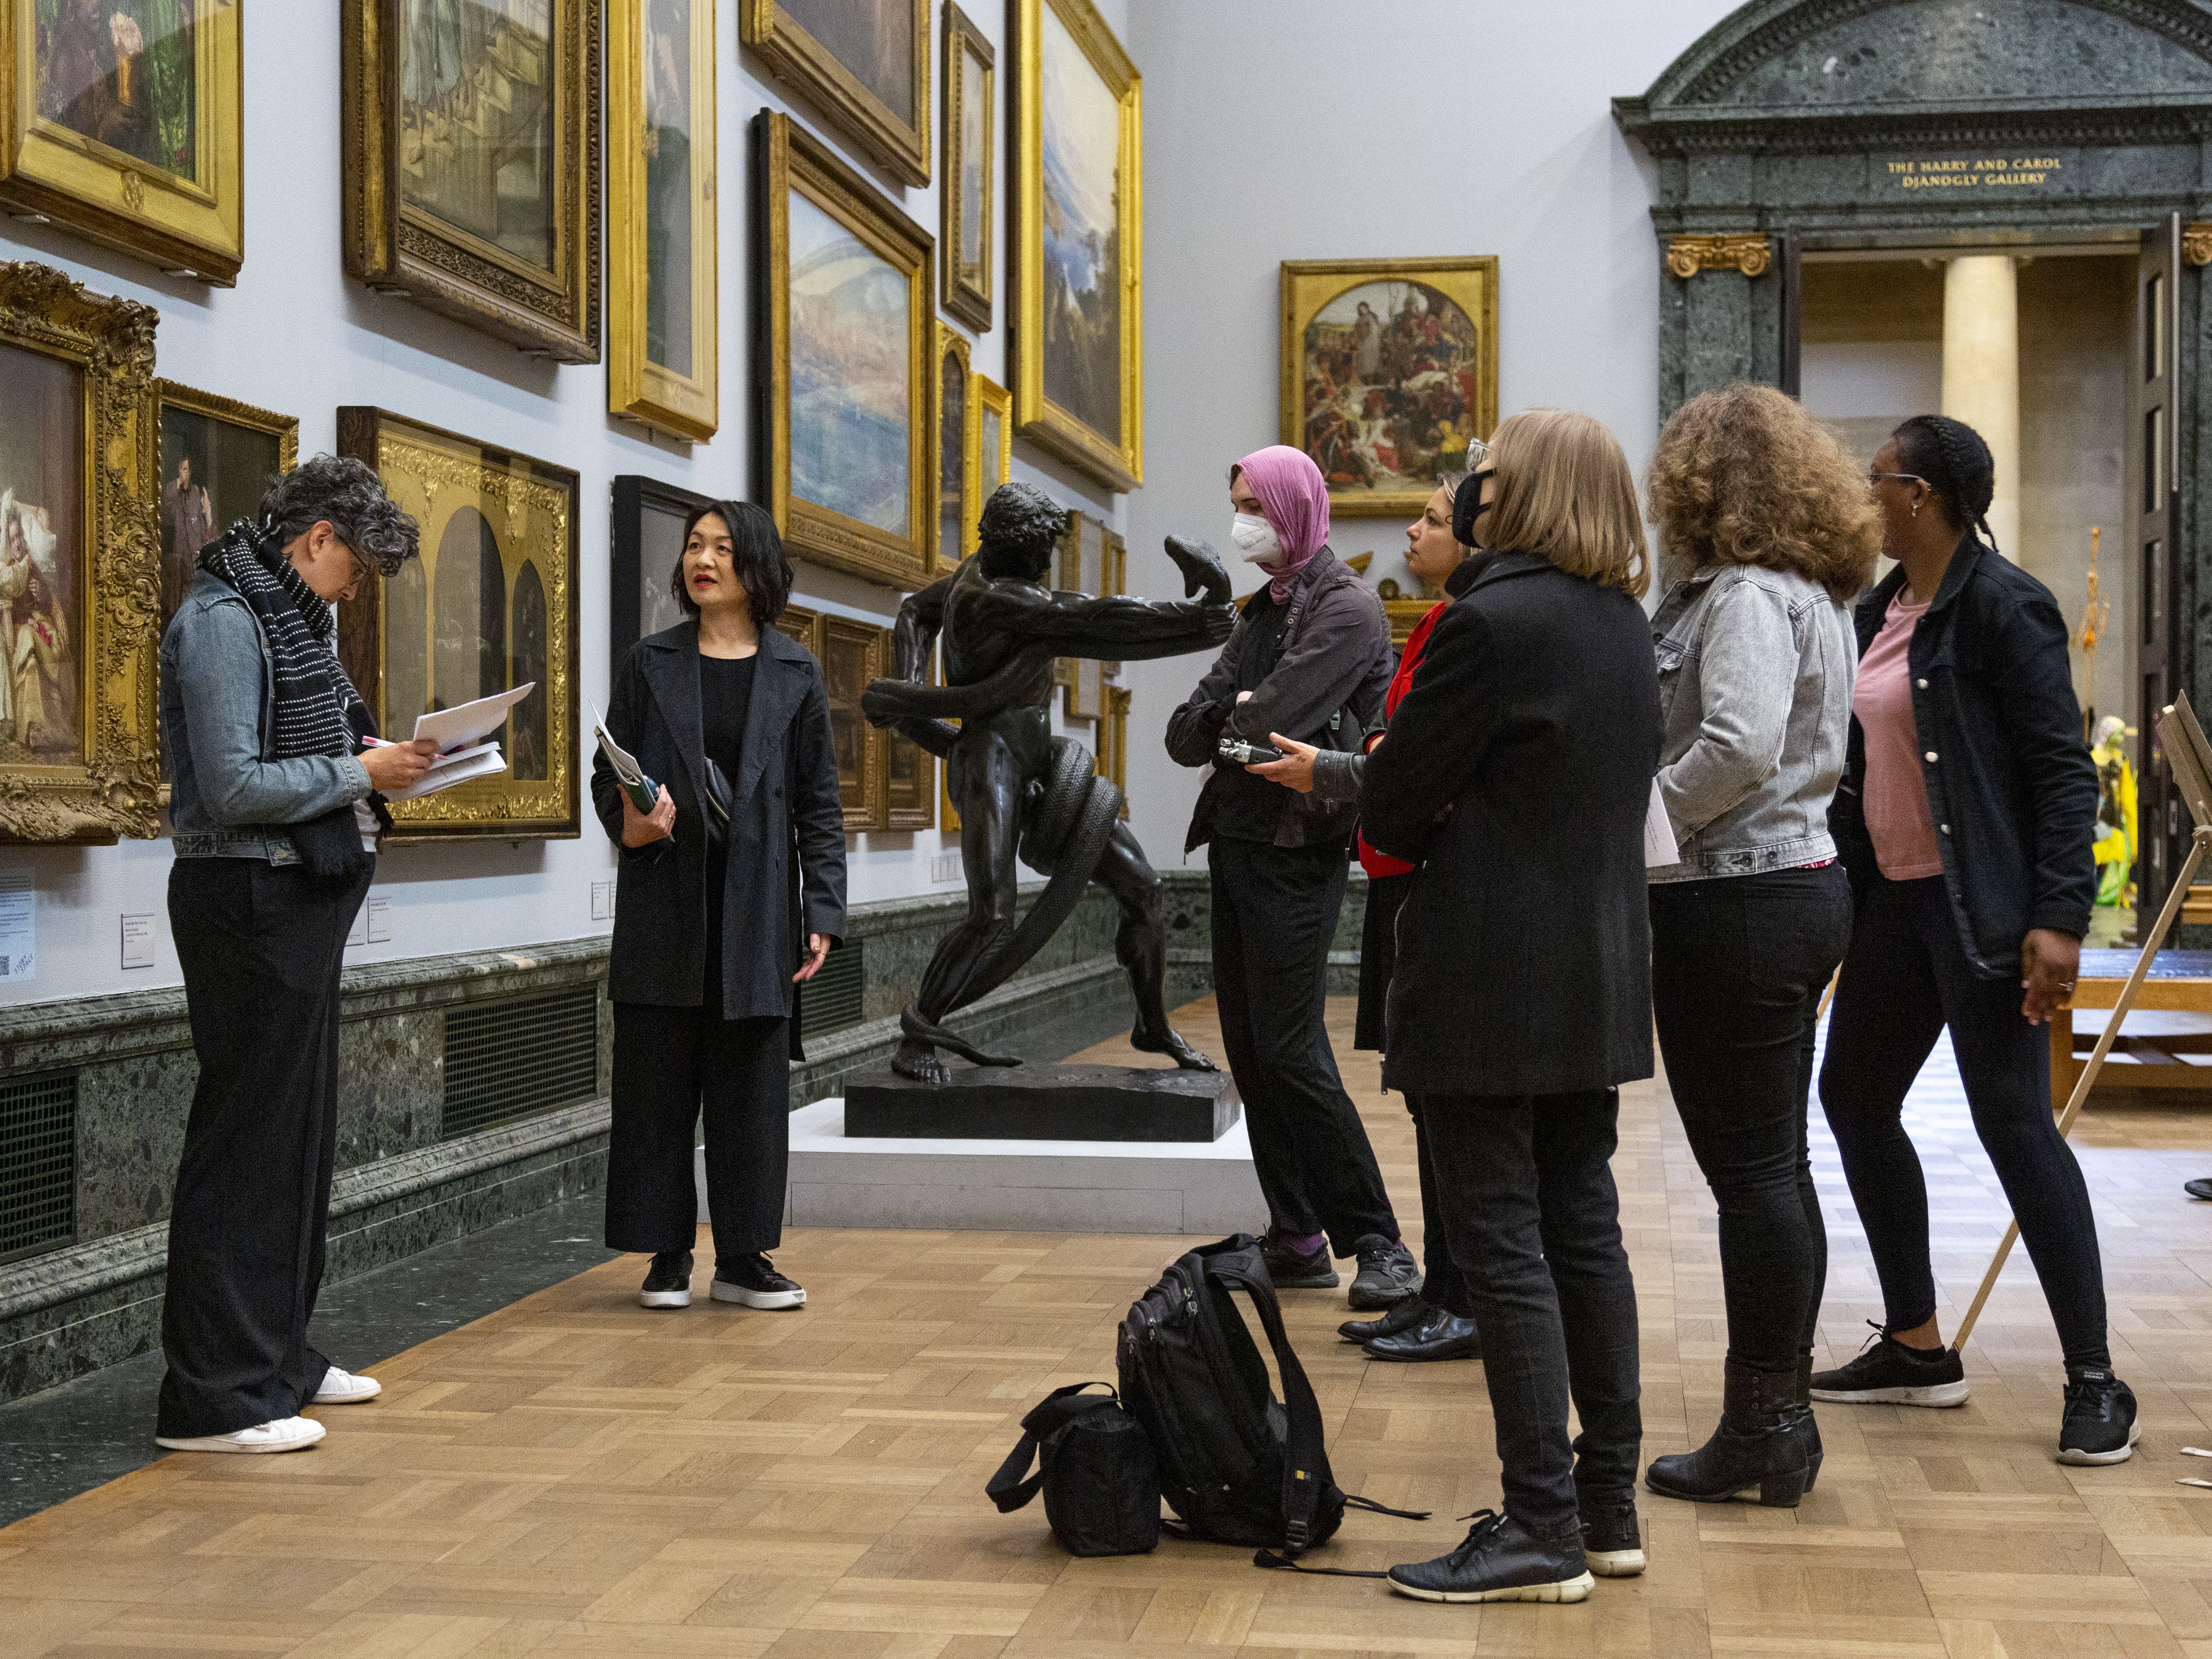 A group of people in a museum looking at ornately framed artworks on the wall. There is a parquet floor and a doorway in the background with pillars 